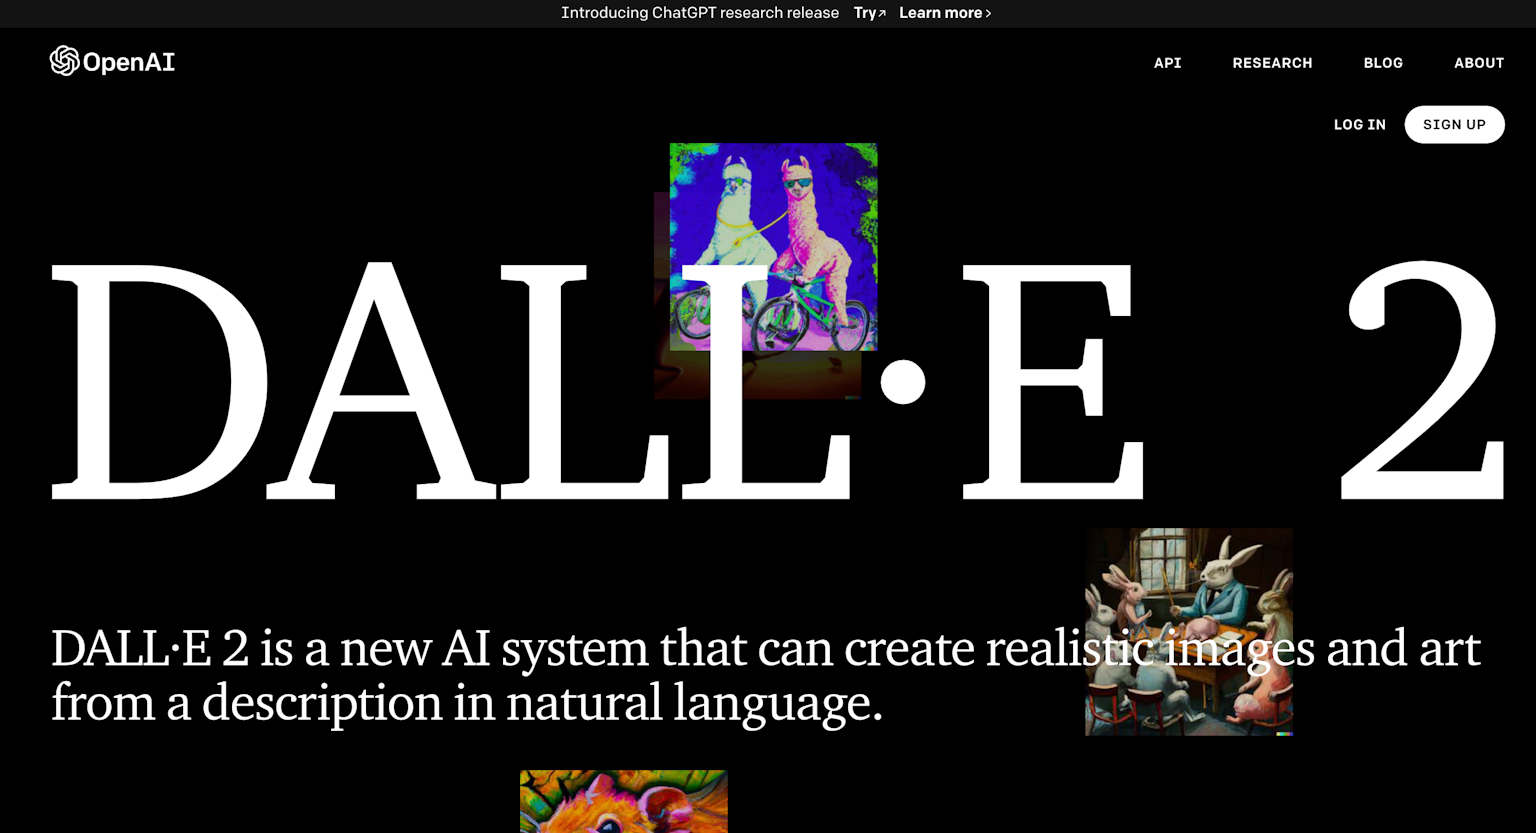 DALLE 2 : AI system to create realistic images and art